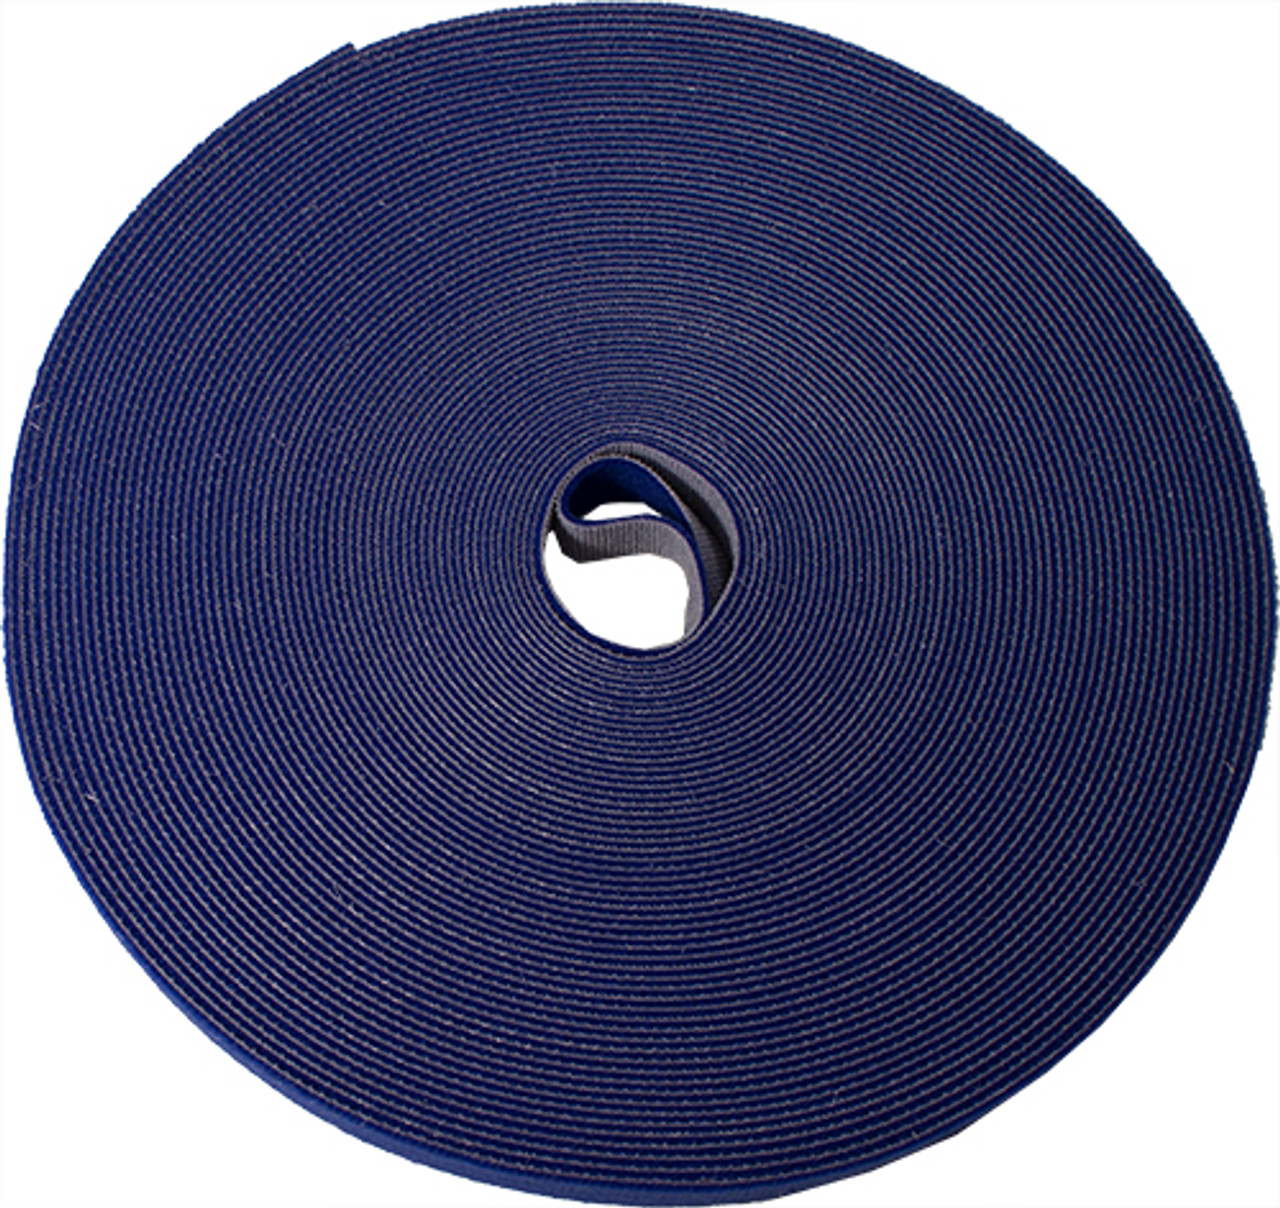 Vertical Cable 75' Roll Velcro Tie Wrap 045-V12/75BL